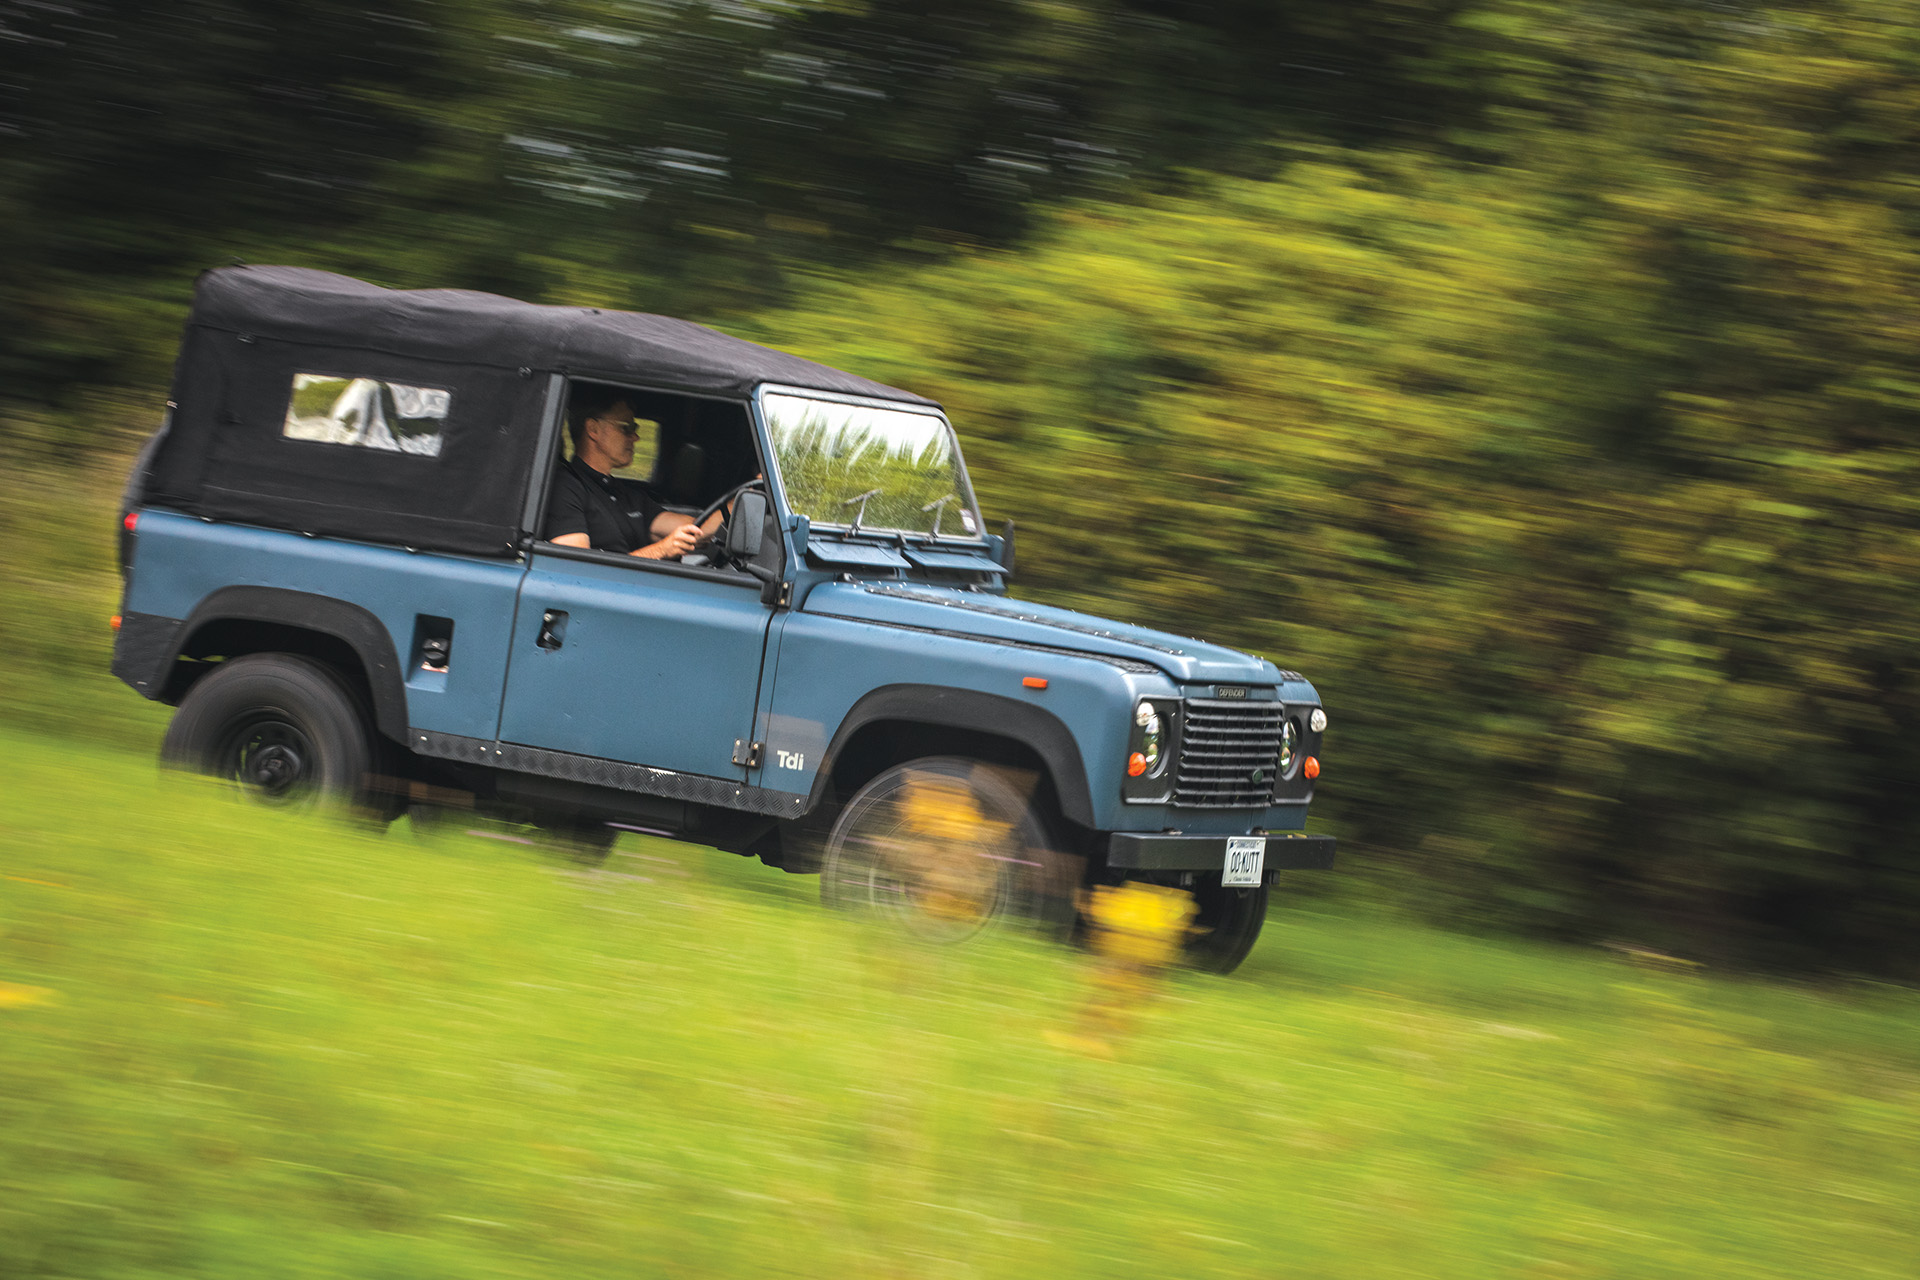 The Land Rover Defender has always been great at one thing